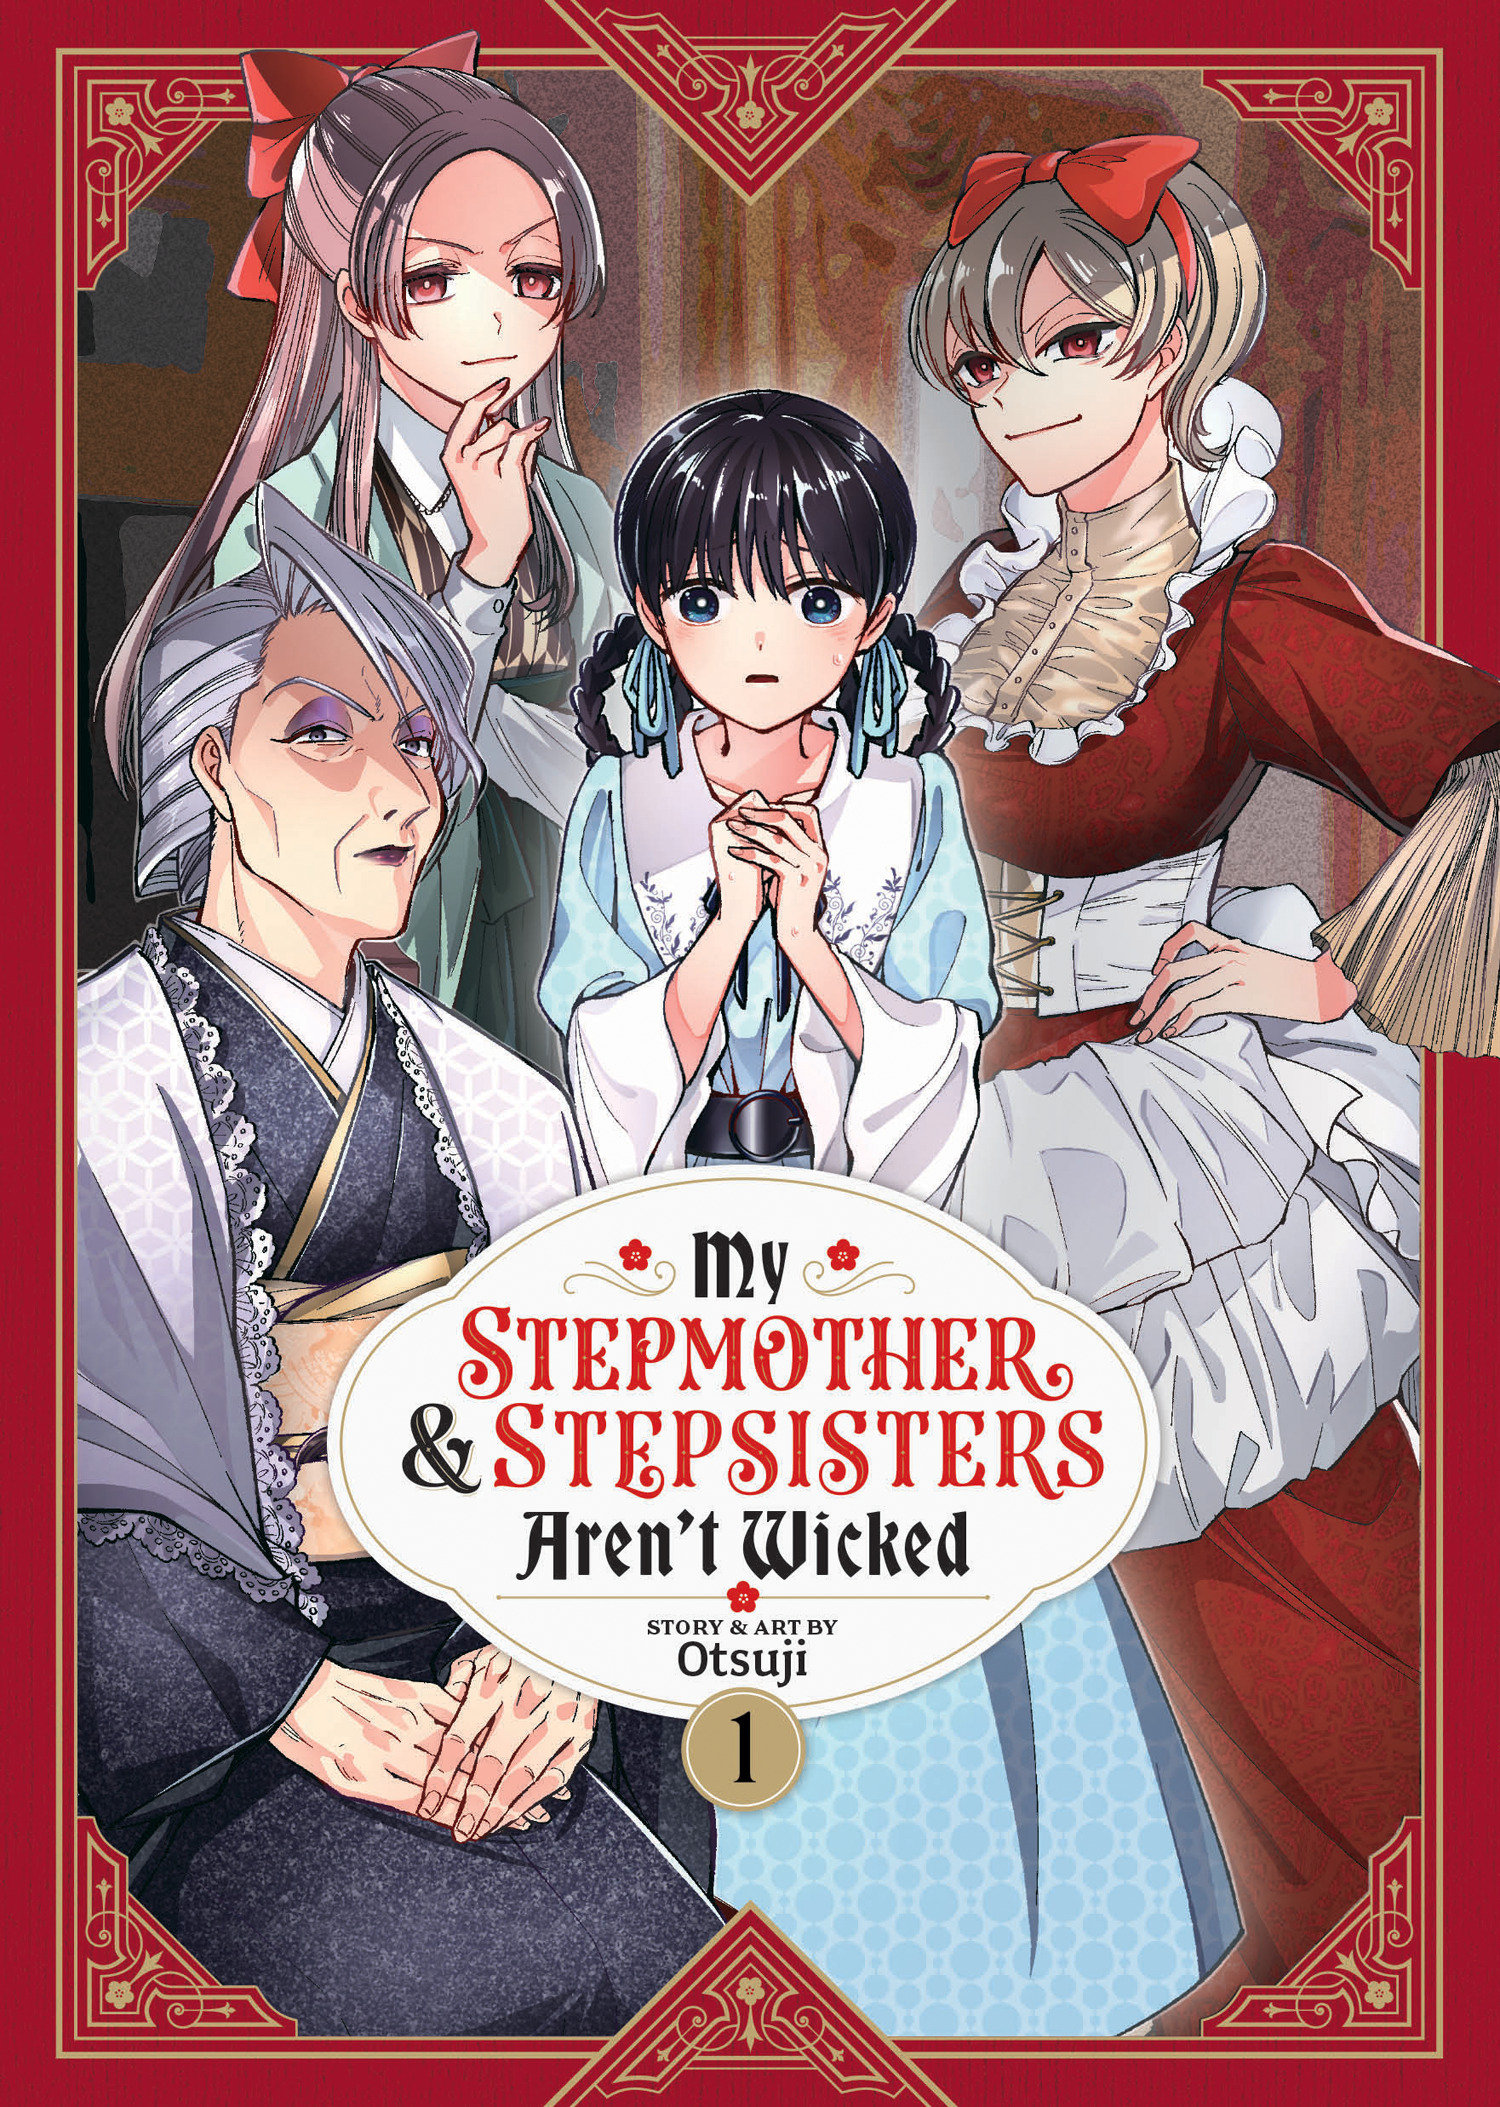 My Stepmother & Stepsisters Aren't Wicked Volume 1